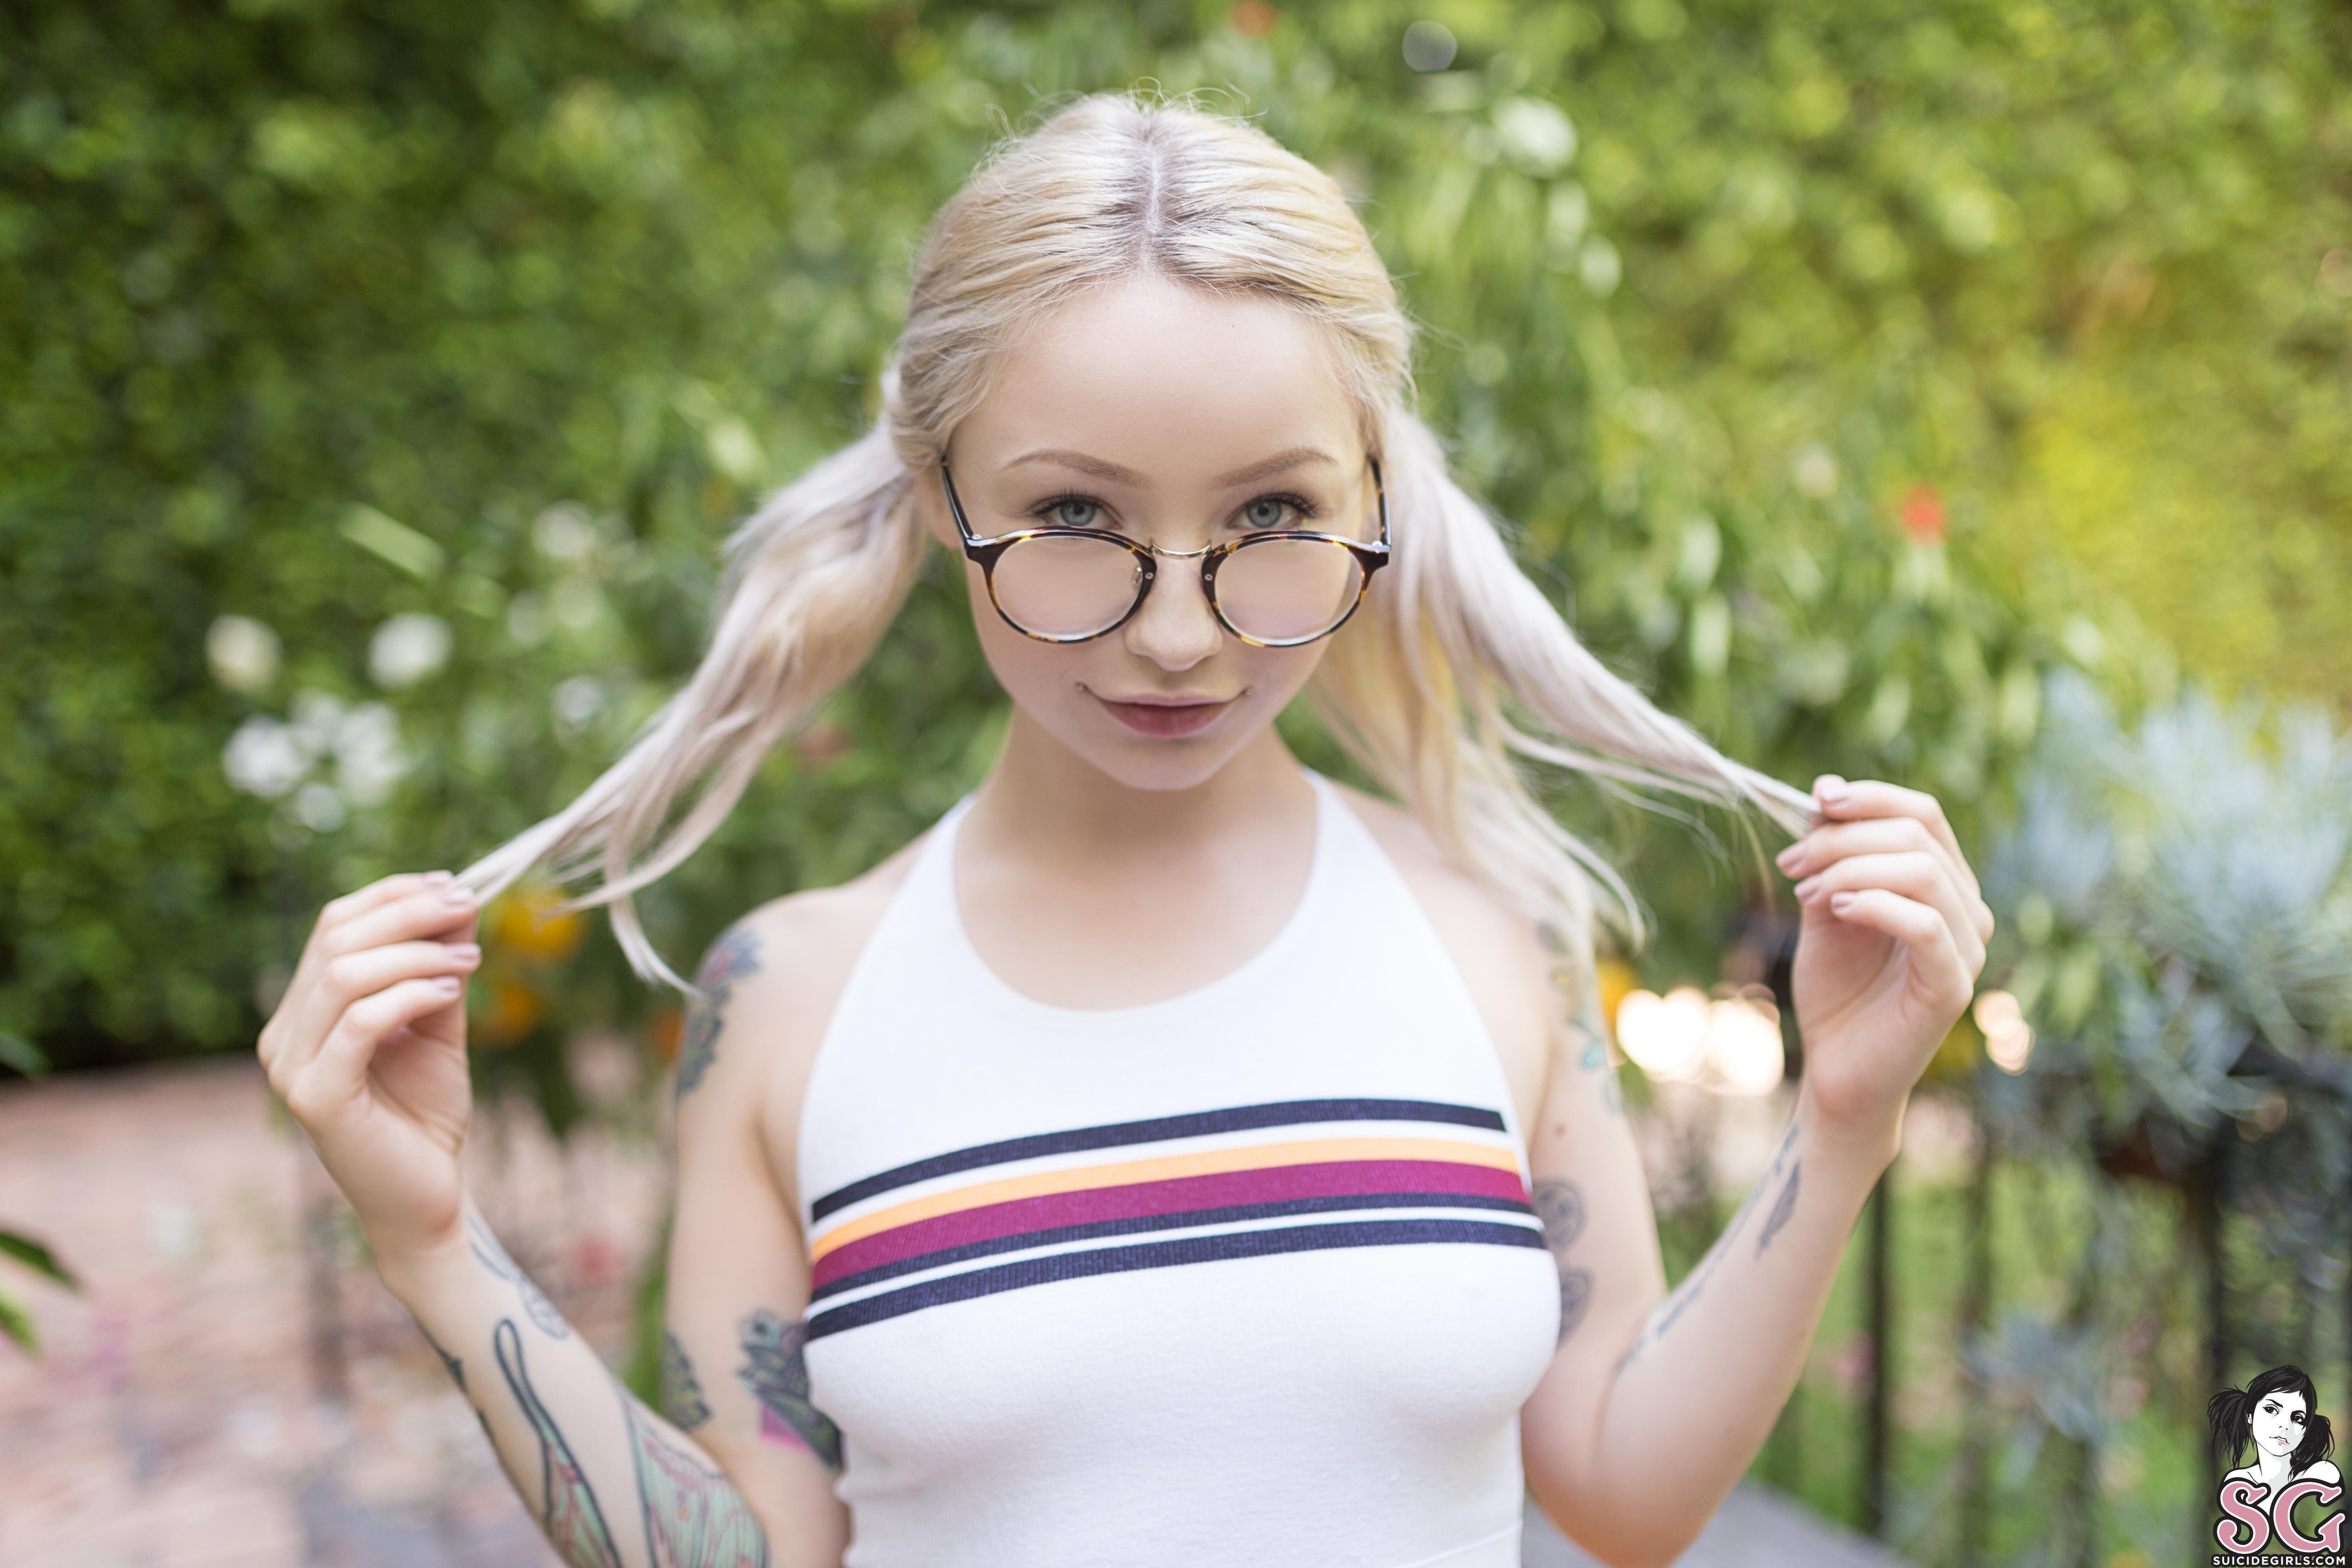 Pigtails babe fan compilation